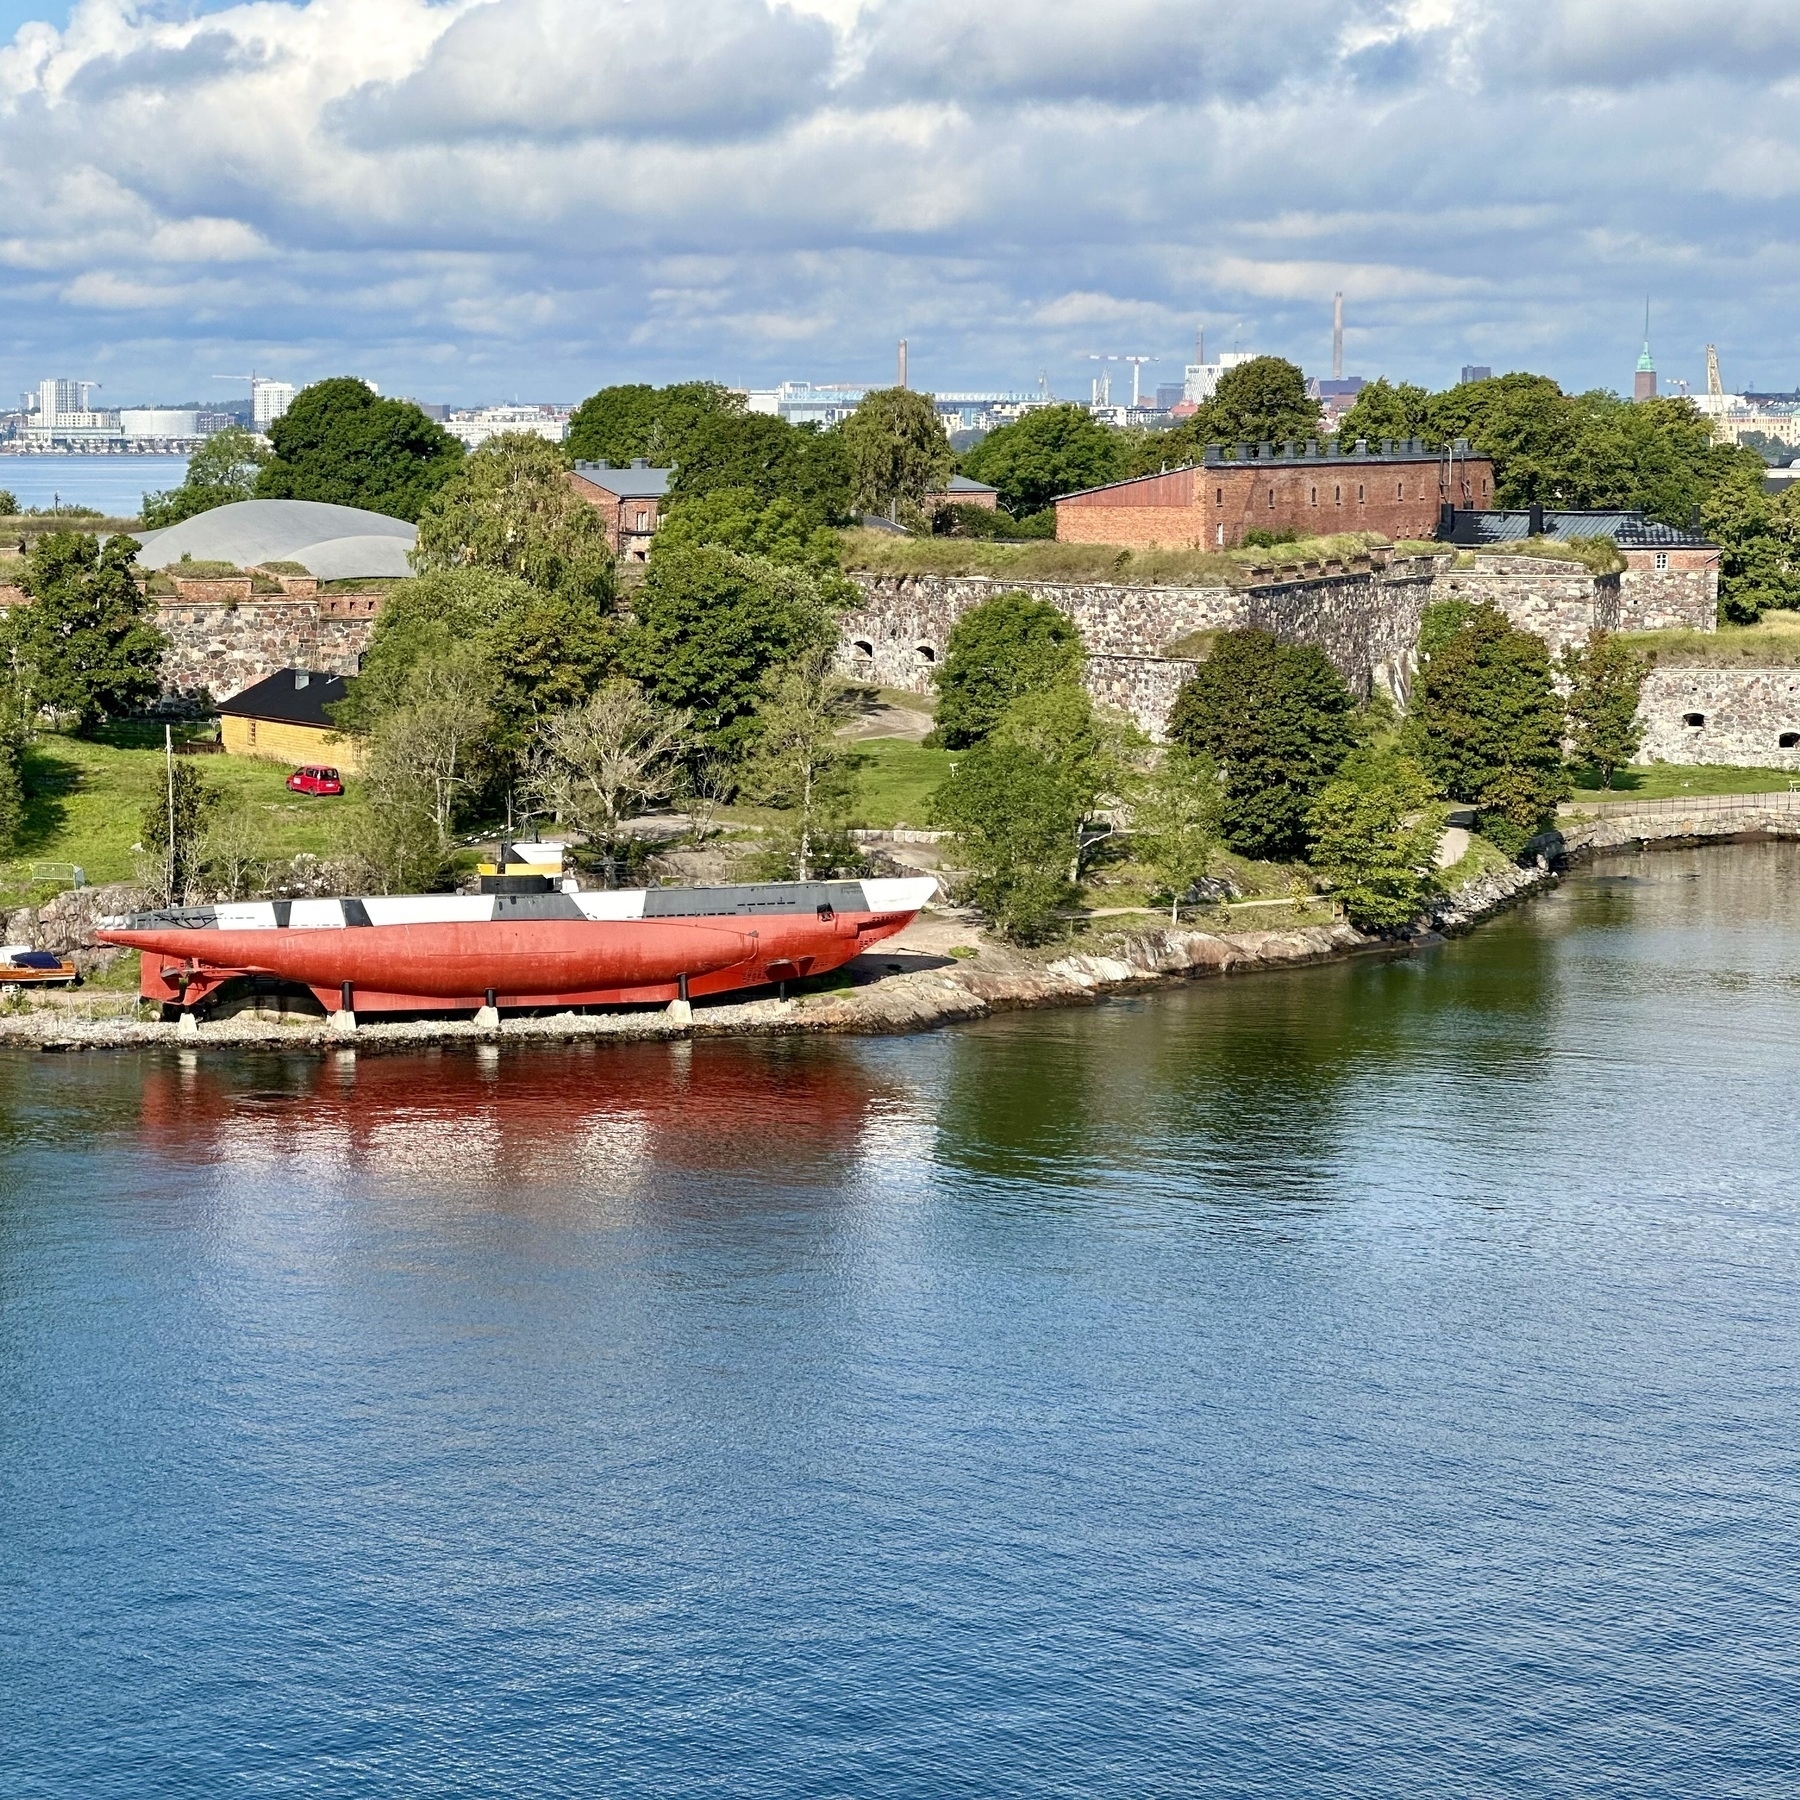 A U-boat that looks a bit like a shark on the island fortress of Suomenlinna.